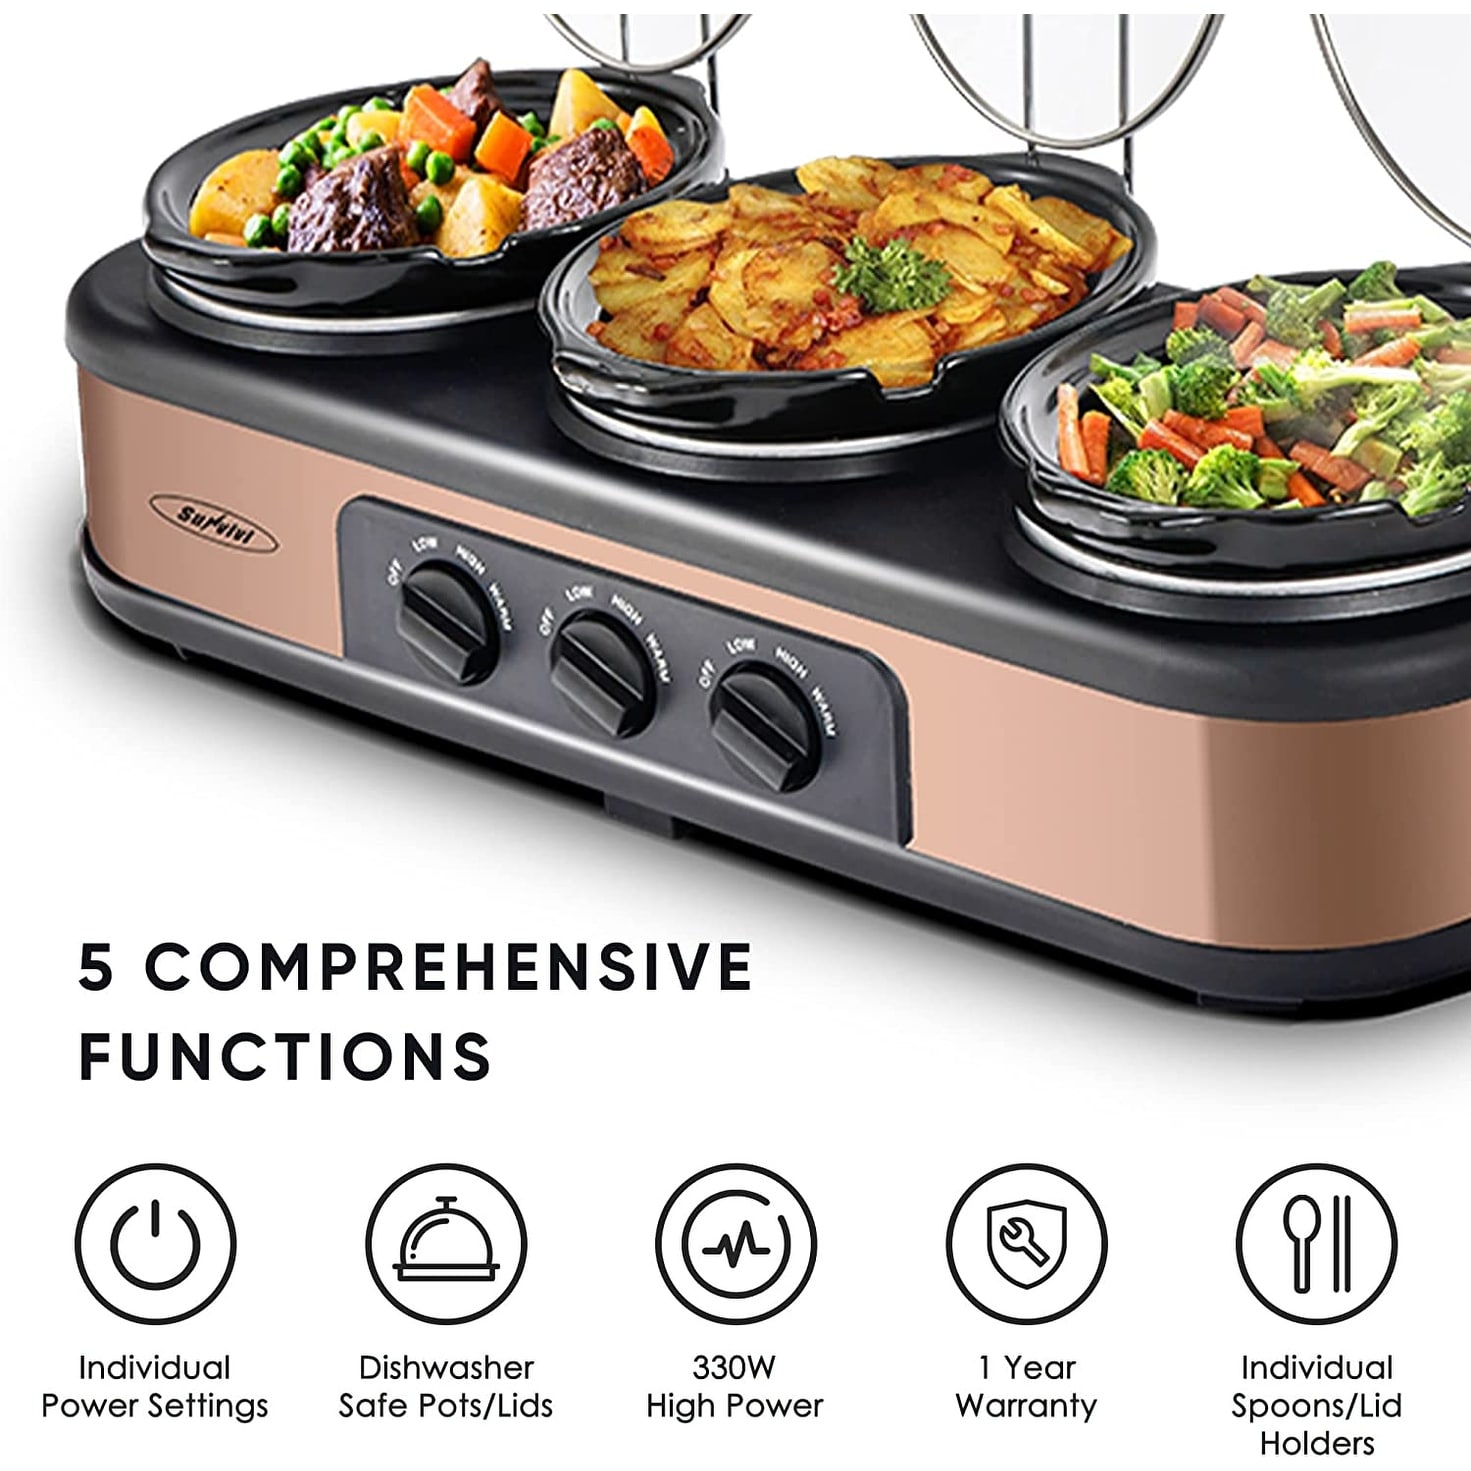 Triple 4.5 QT Slow Cooker, Buffet Servers and Warmer, 3 Pot Mini Manual Slow  Cooker with Adjustable Temp, Lid Rests, Ceramic Pot - Bed Bath & Beyond -  39589323